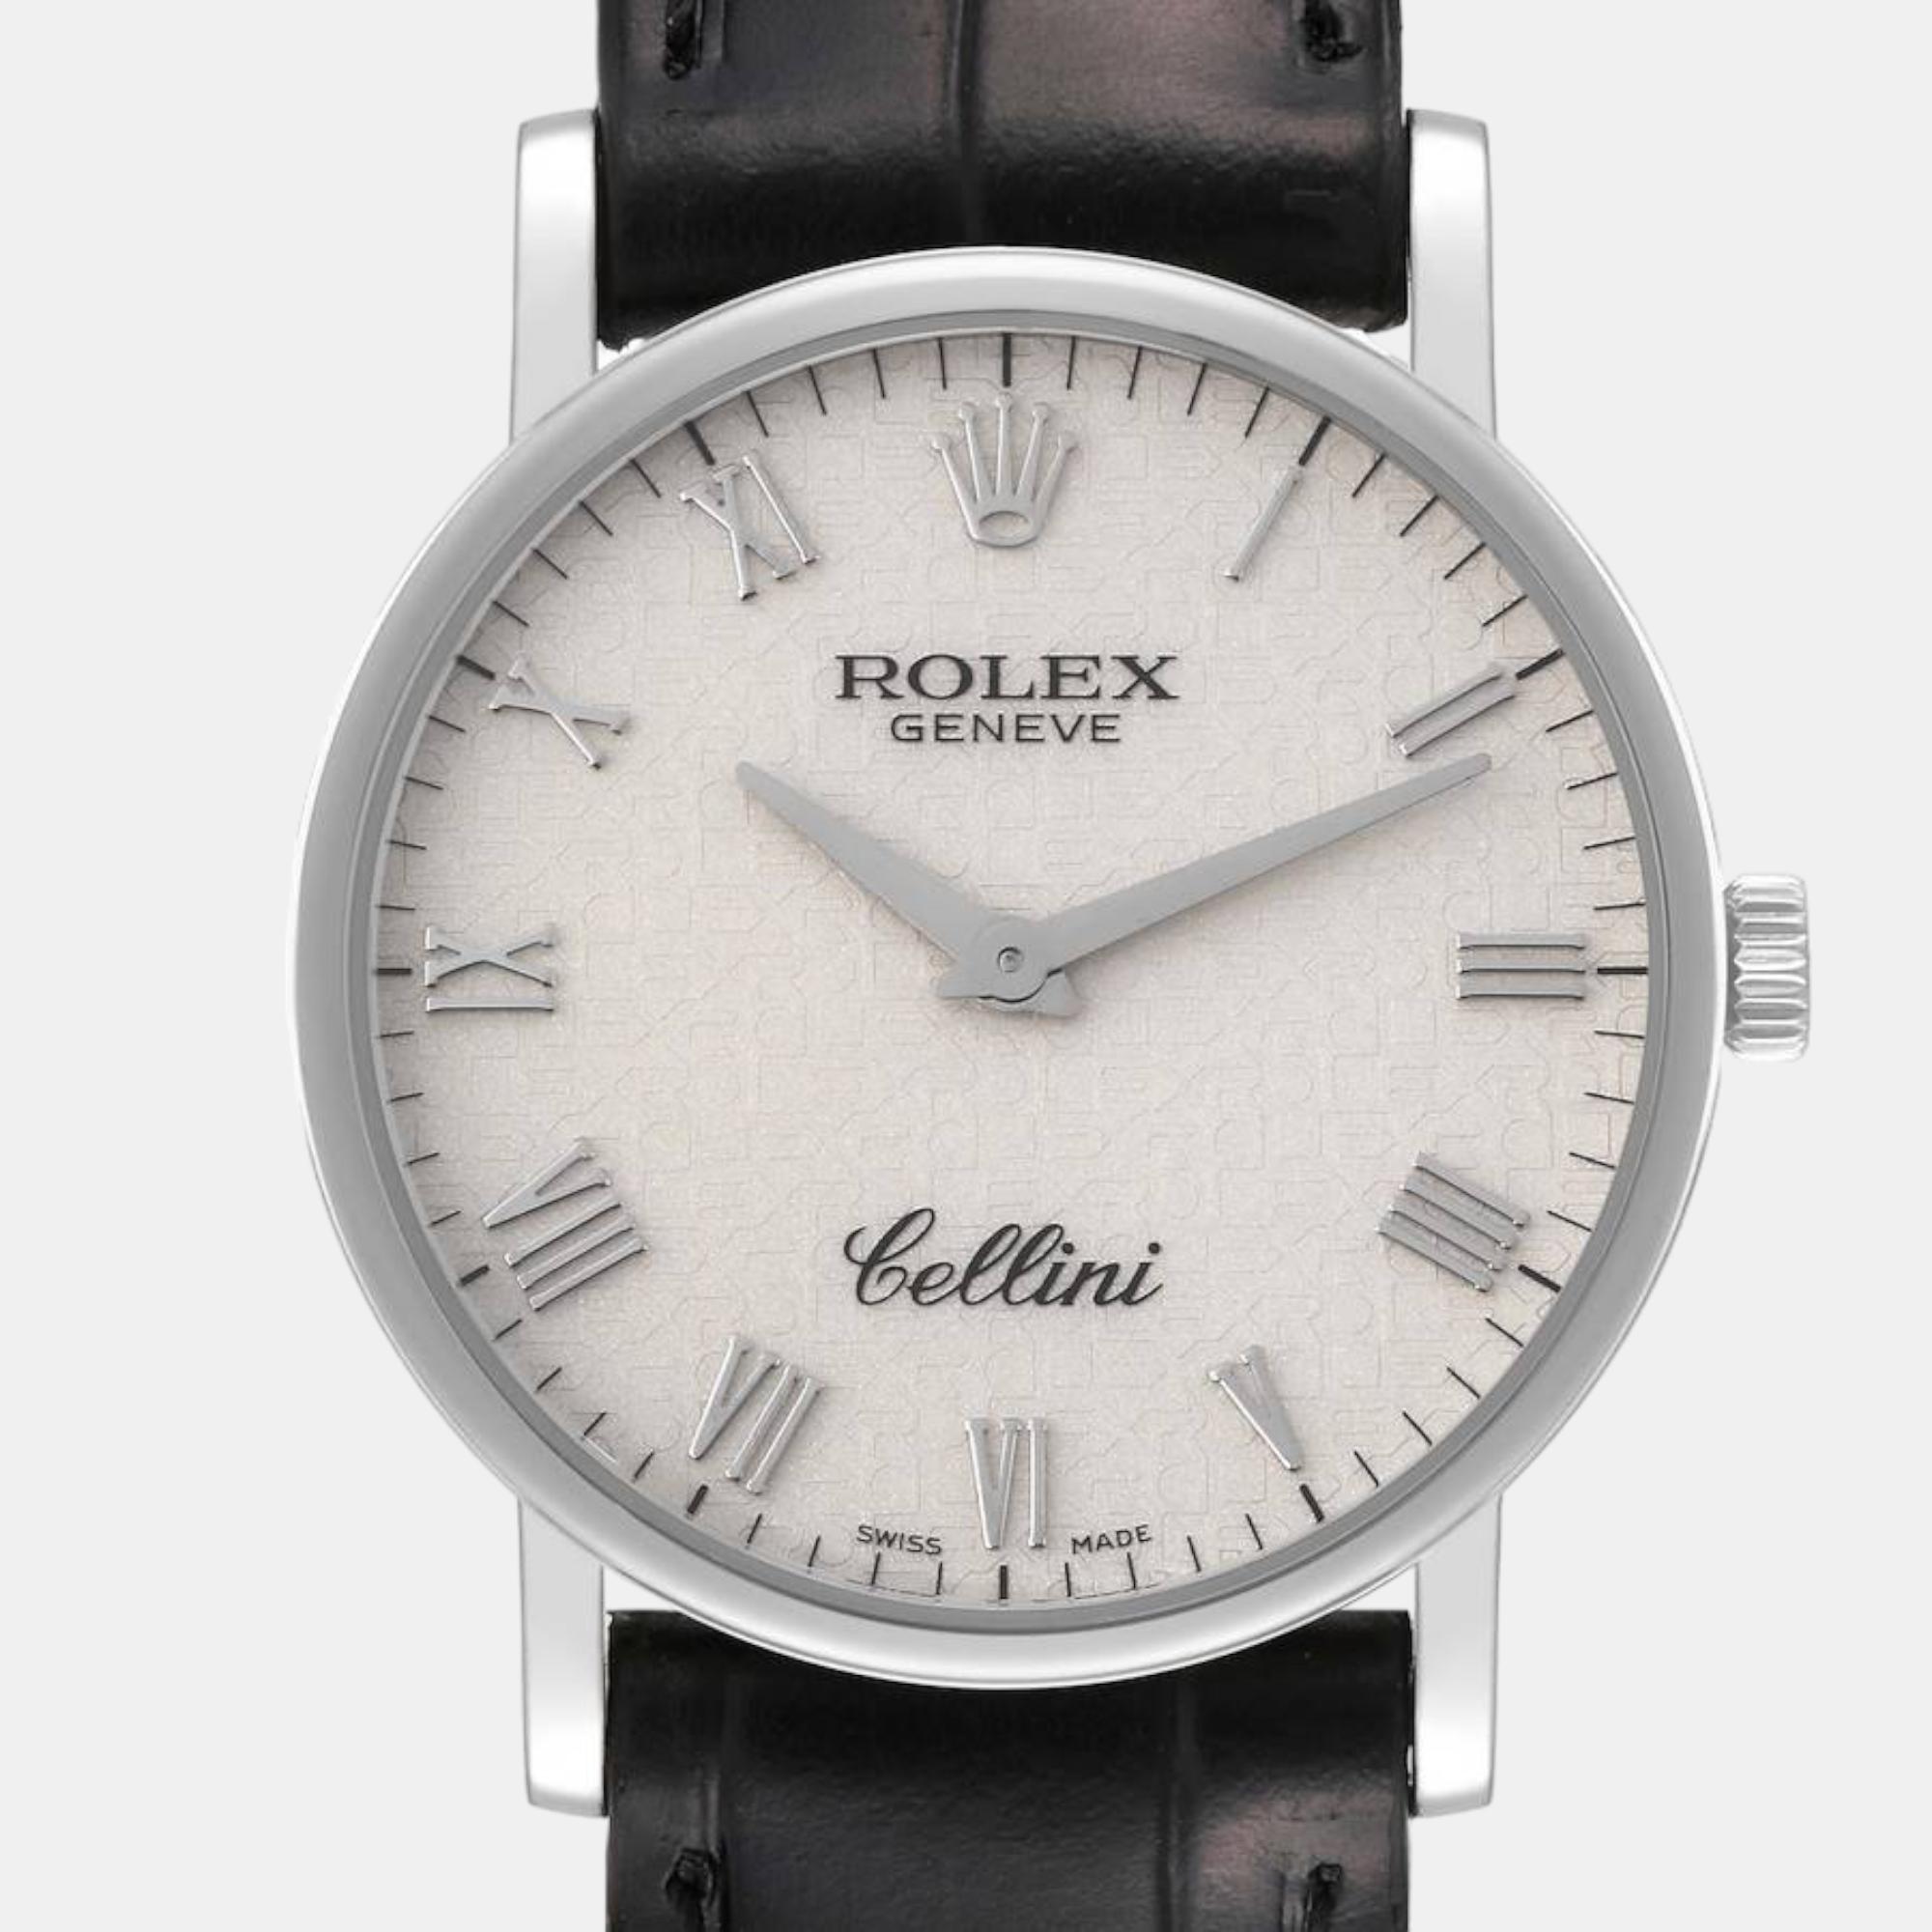 Rolex Cellini Classic White Gold Ivory Anniversary Dial Men's Watch 5115 32 Mm